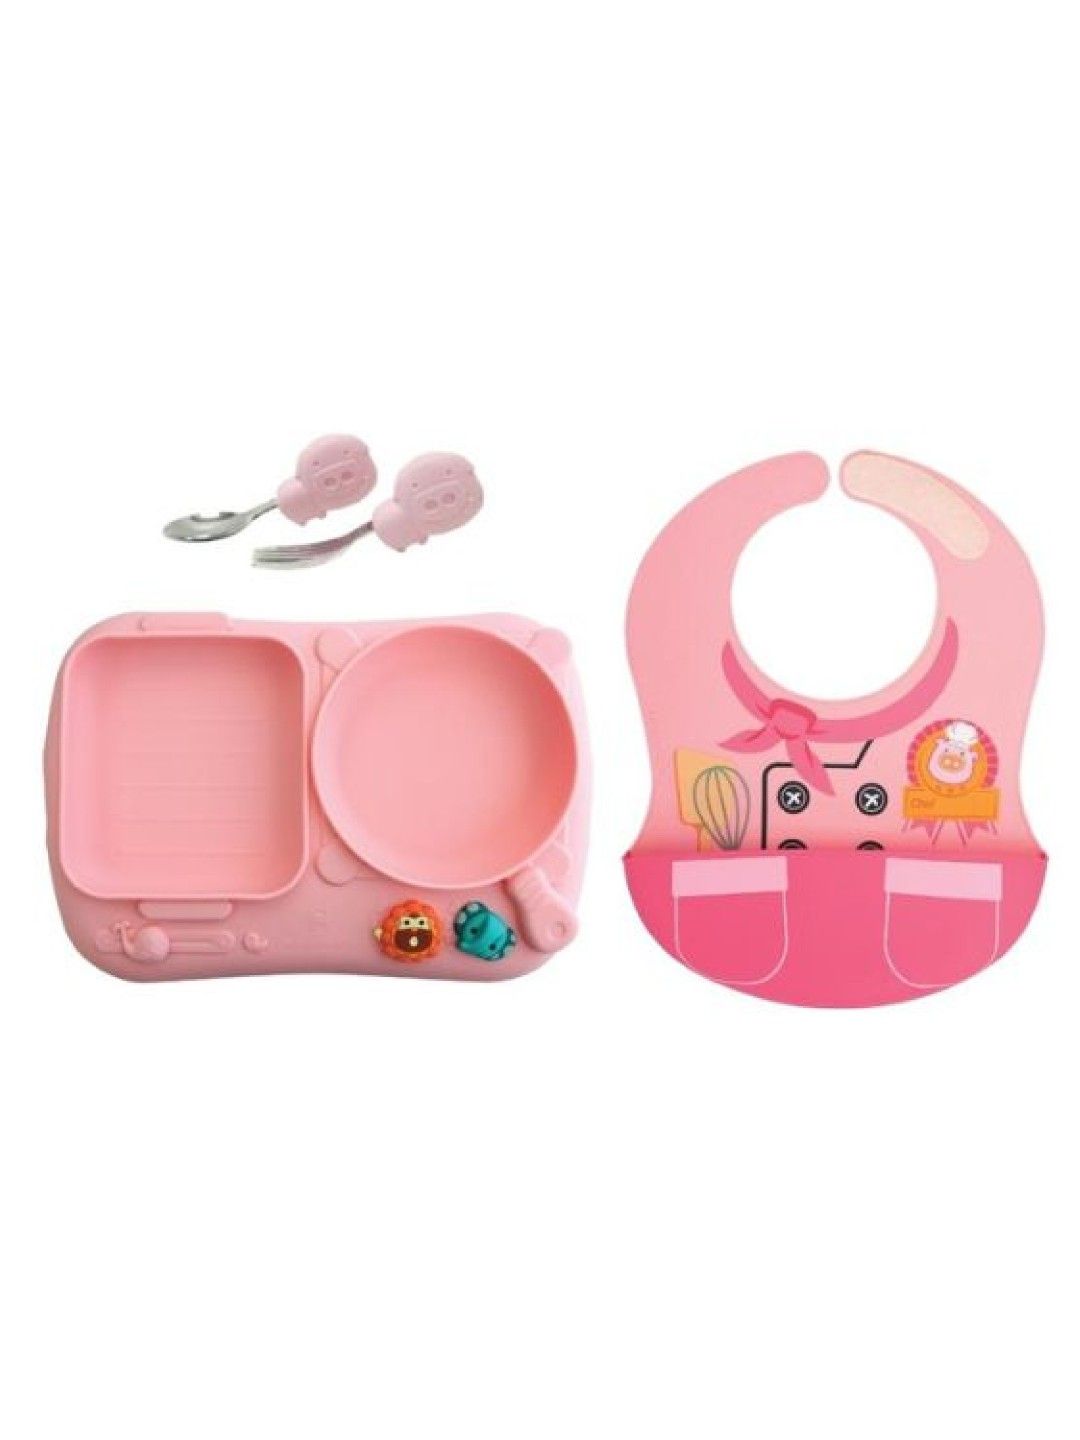 Marcus & Marcus Creativeplate Toddler Meal Time Set Little Chef